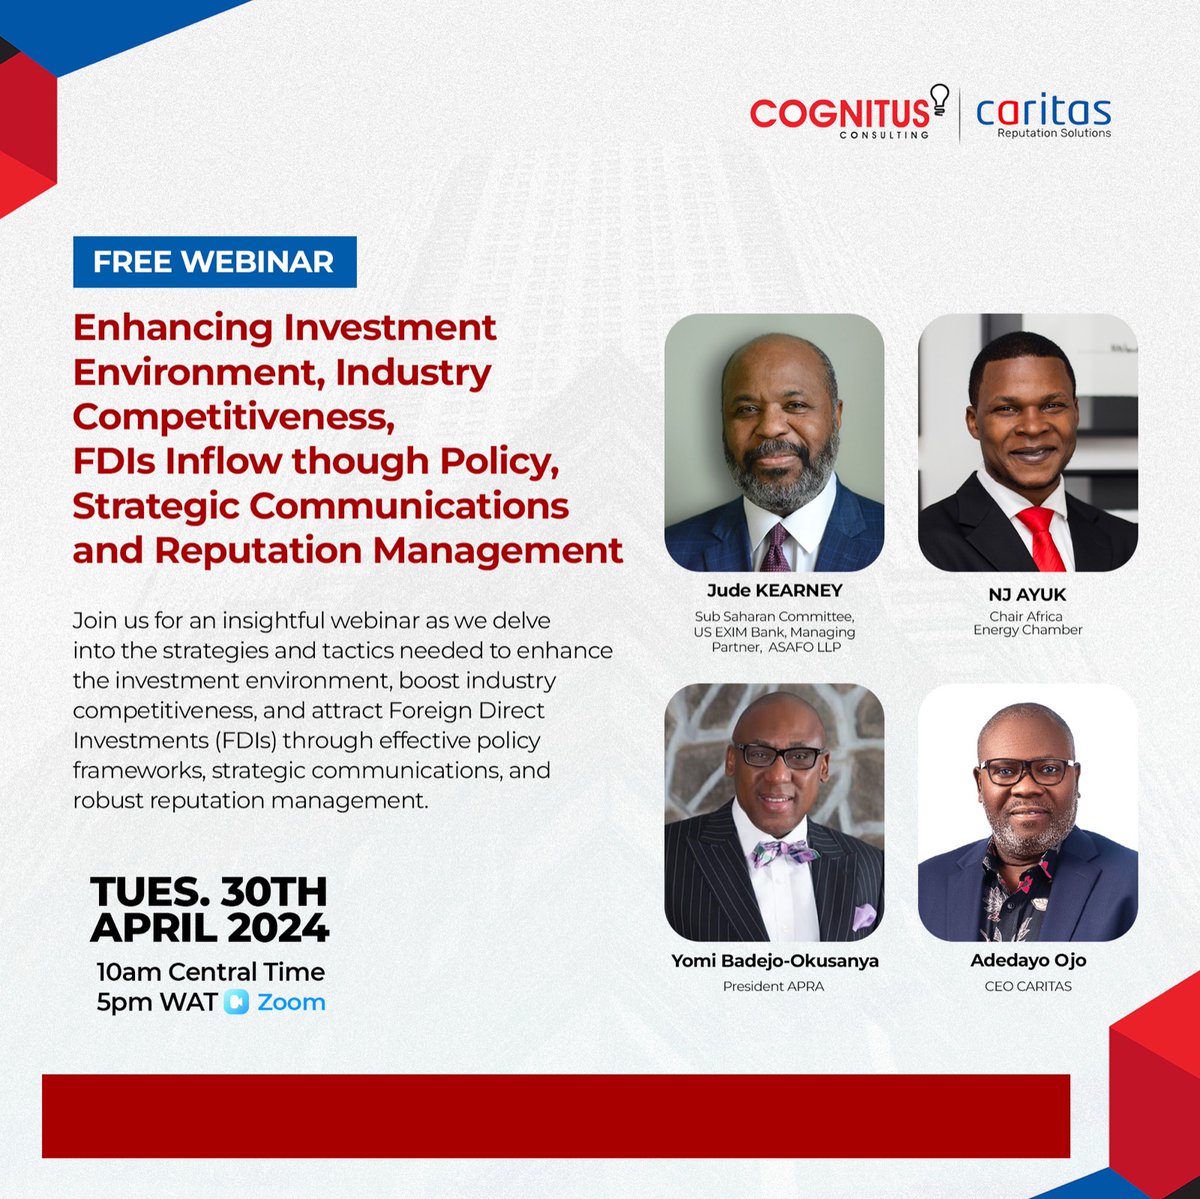 Don’t miss out on this educational webinar with influential figures including African Energy Chamber Executive Chairman Mr @nj_ayuk where it’s set to delve into strategies and tactics in enhancing investment environment, investigate strategic communications and reputation